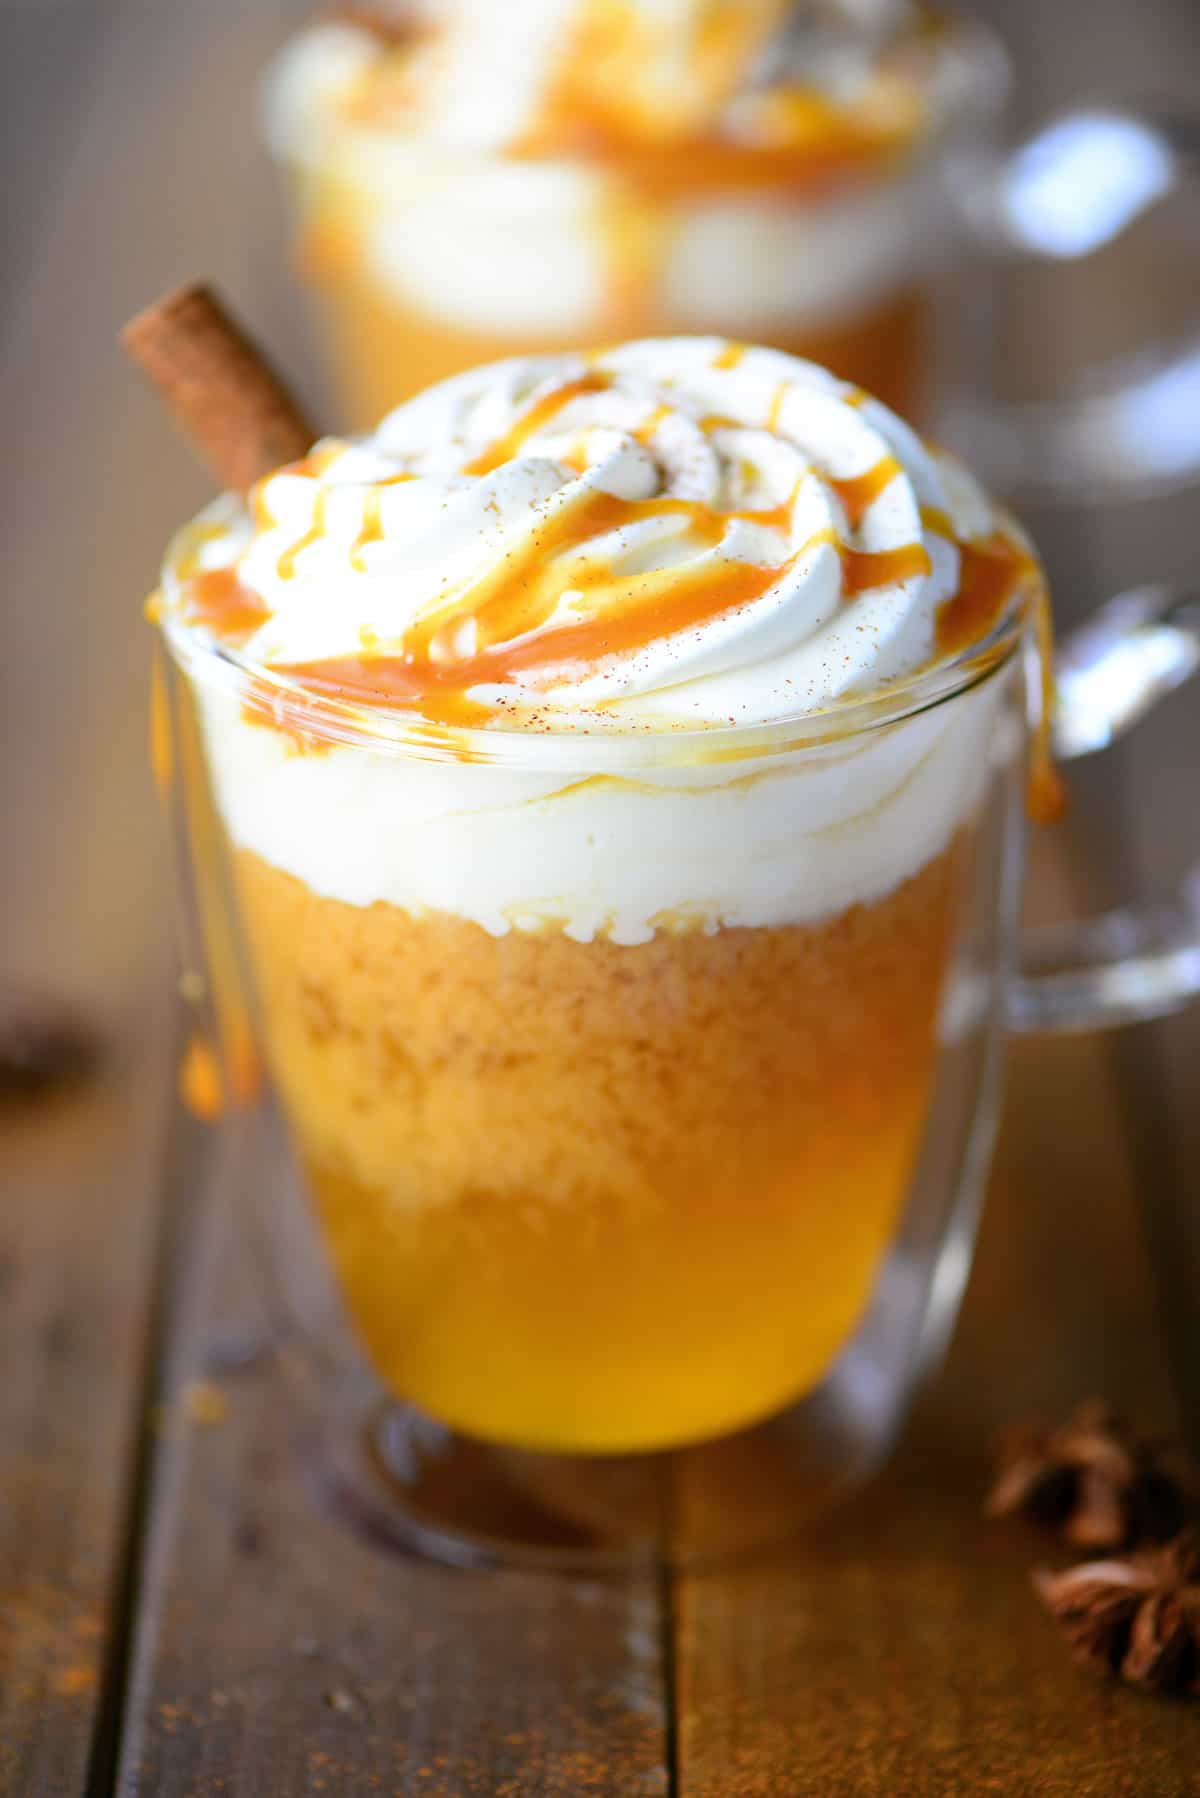 Slow Cooker Apple Cider in a Glass Mug with Caramel and Whipped Cream On Top